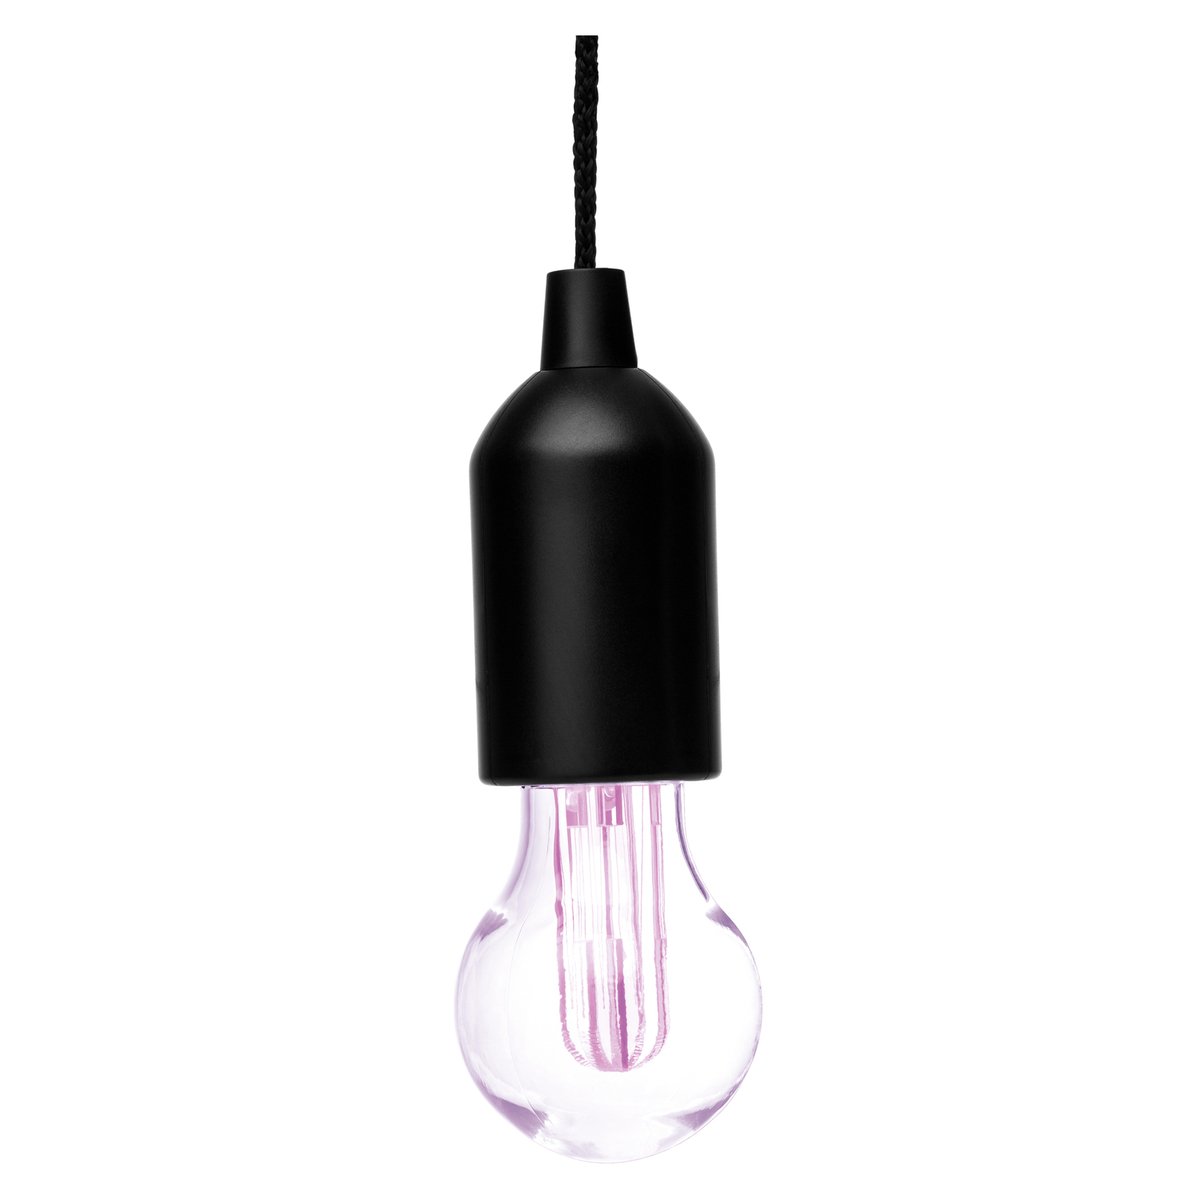 Lampe LED à couleurs changeantes REFLECTS-GALESBURG III noir